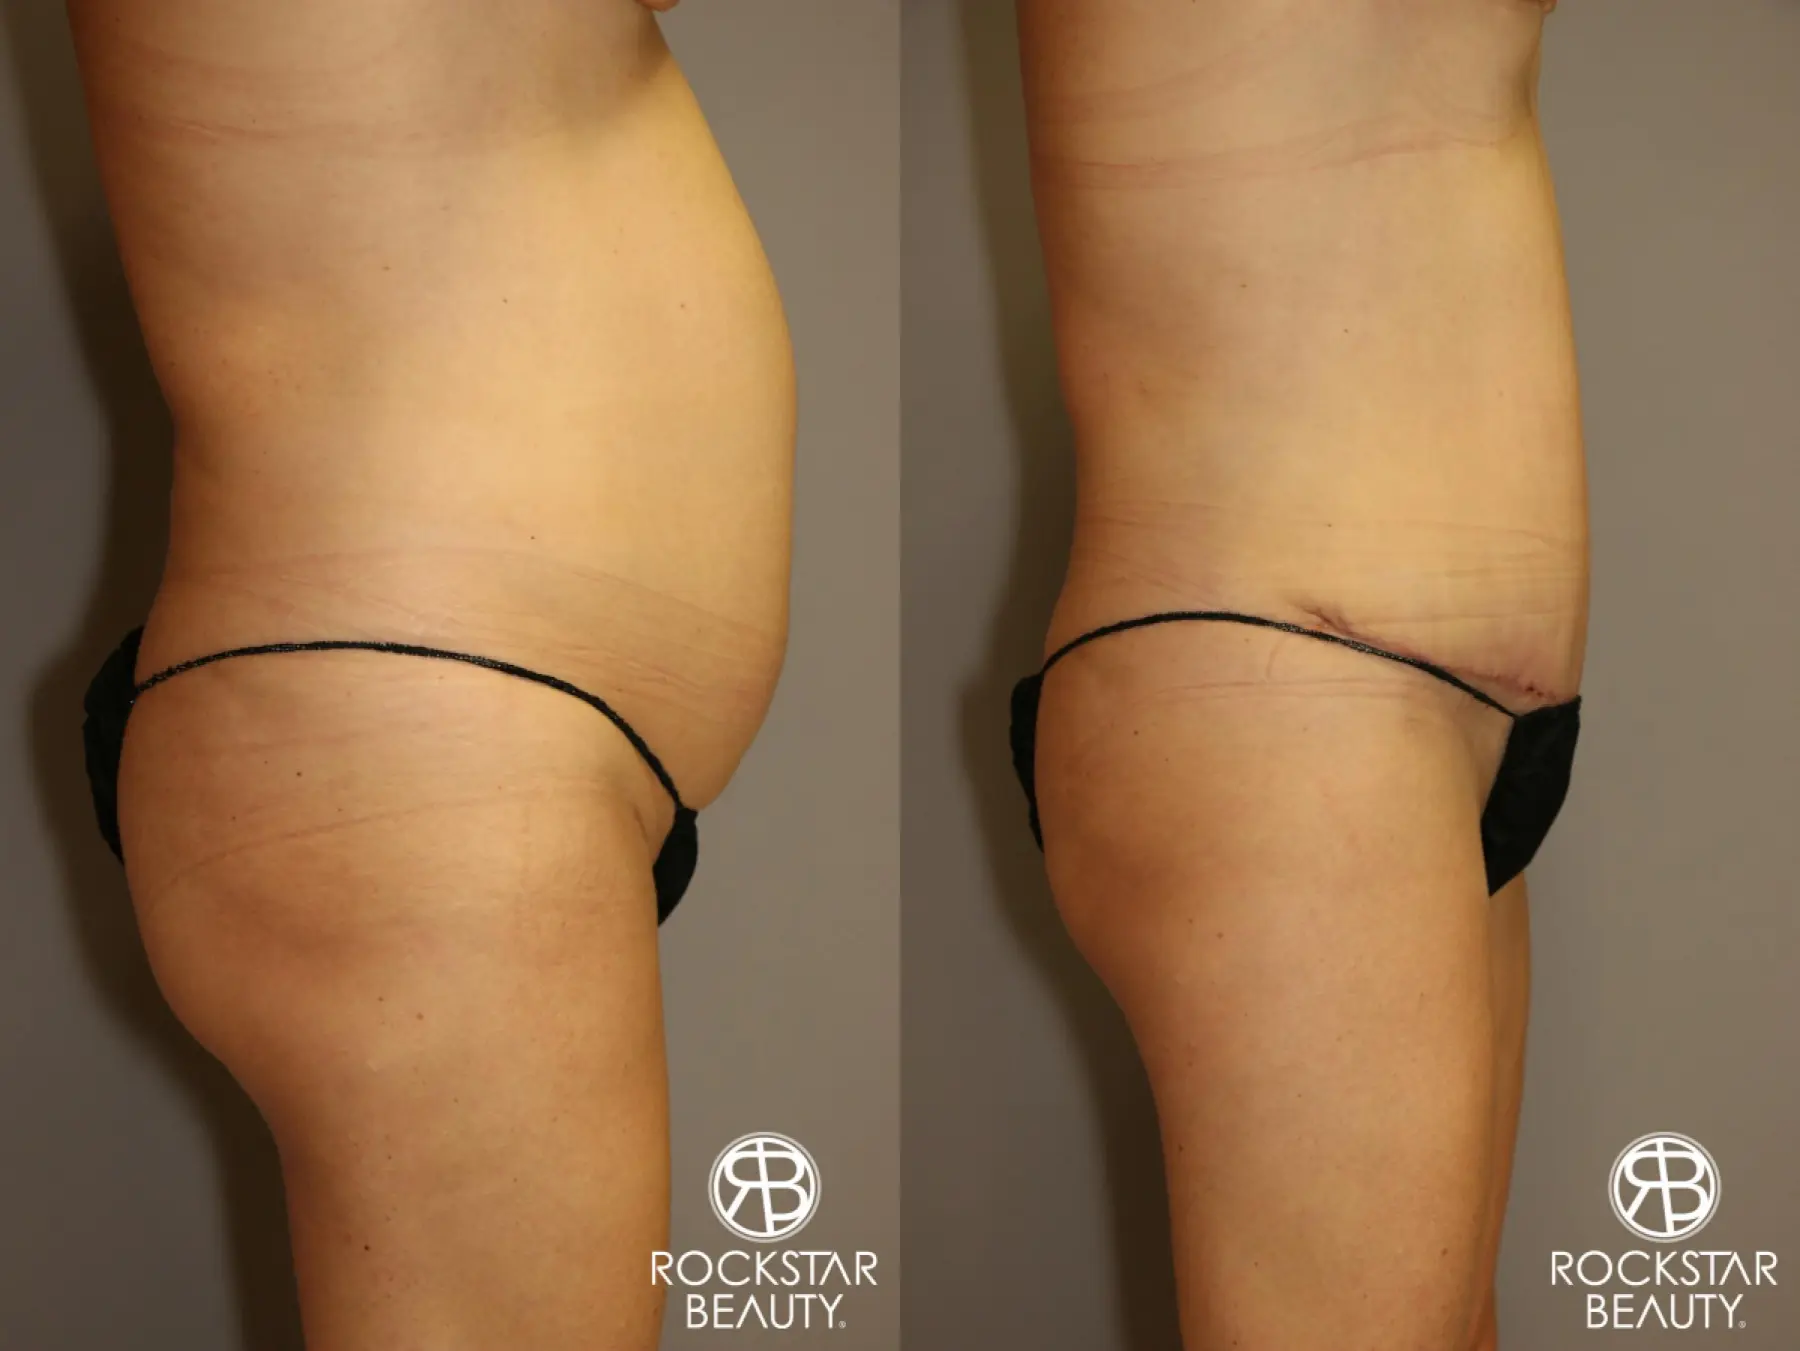 Tummy Tuck: Patient 1 - Before and After 3